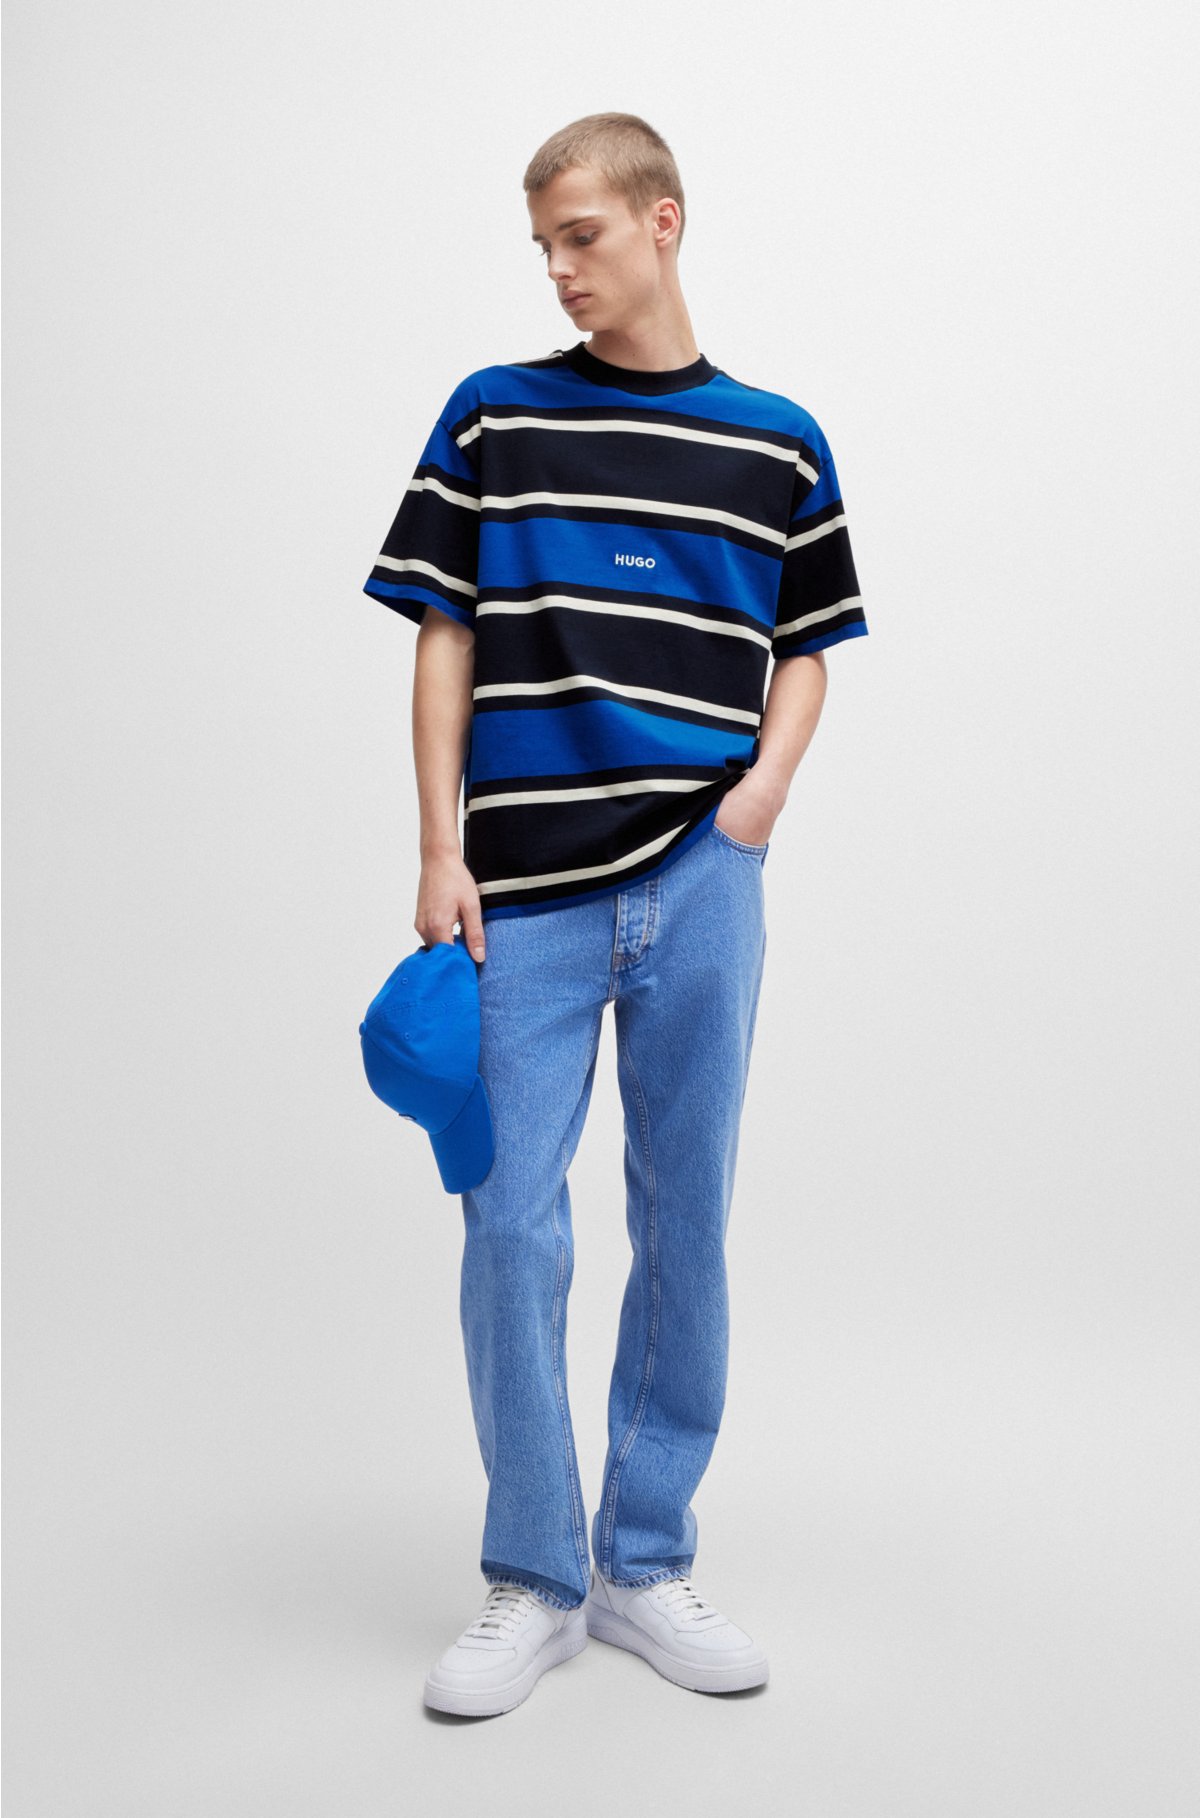 Striped T-shirt in cotton jersey with embroidered logo, Blue